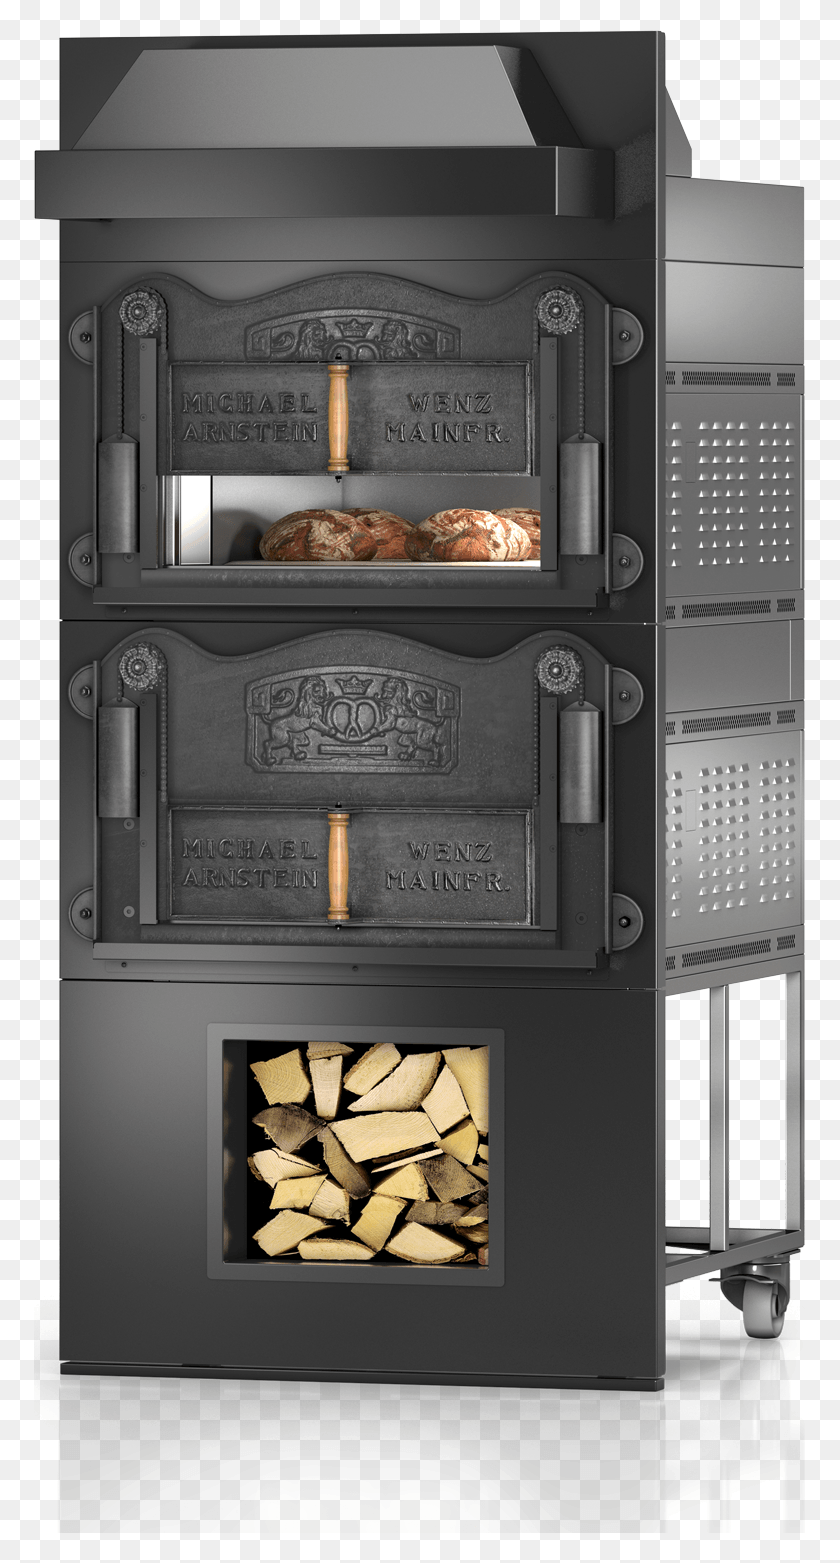 771x1503 Original Designs Of An Old German Wood Burning Oven Michael Wenz Arnstein Mainfr, Appliance, Mailbox, Letterbox HD PNG Download